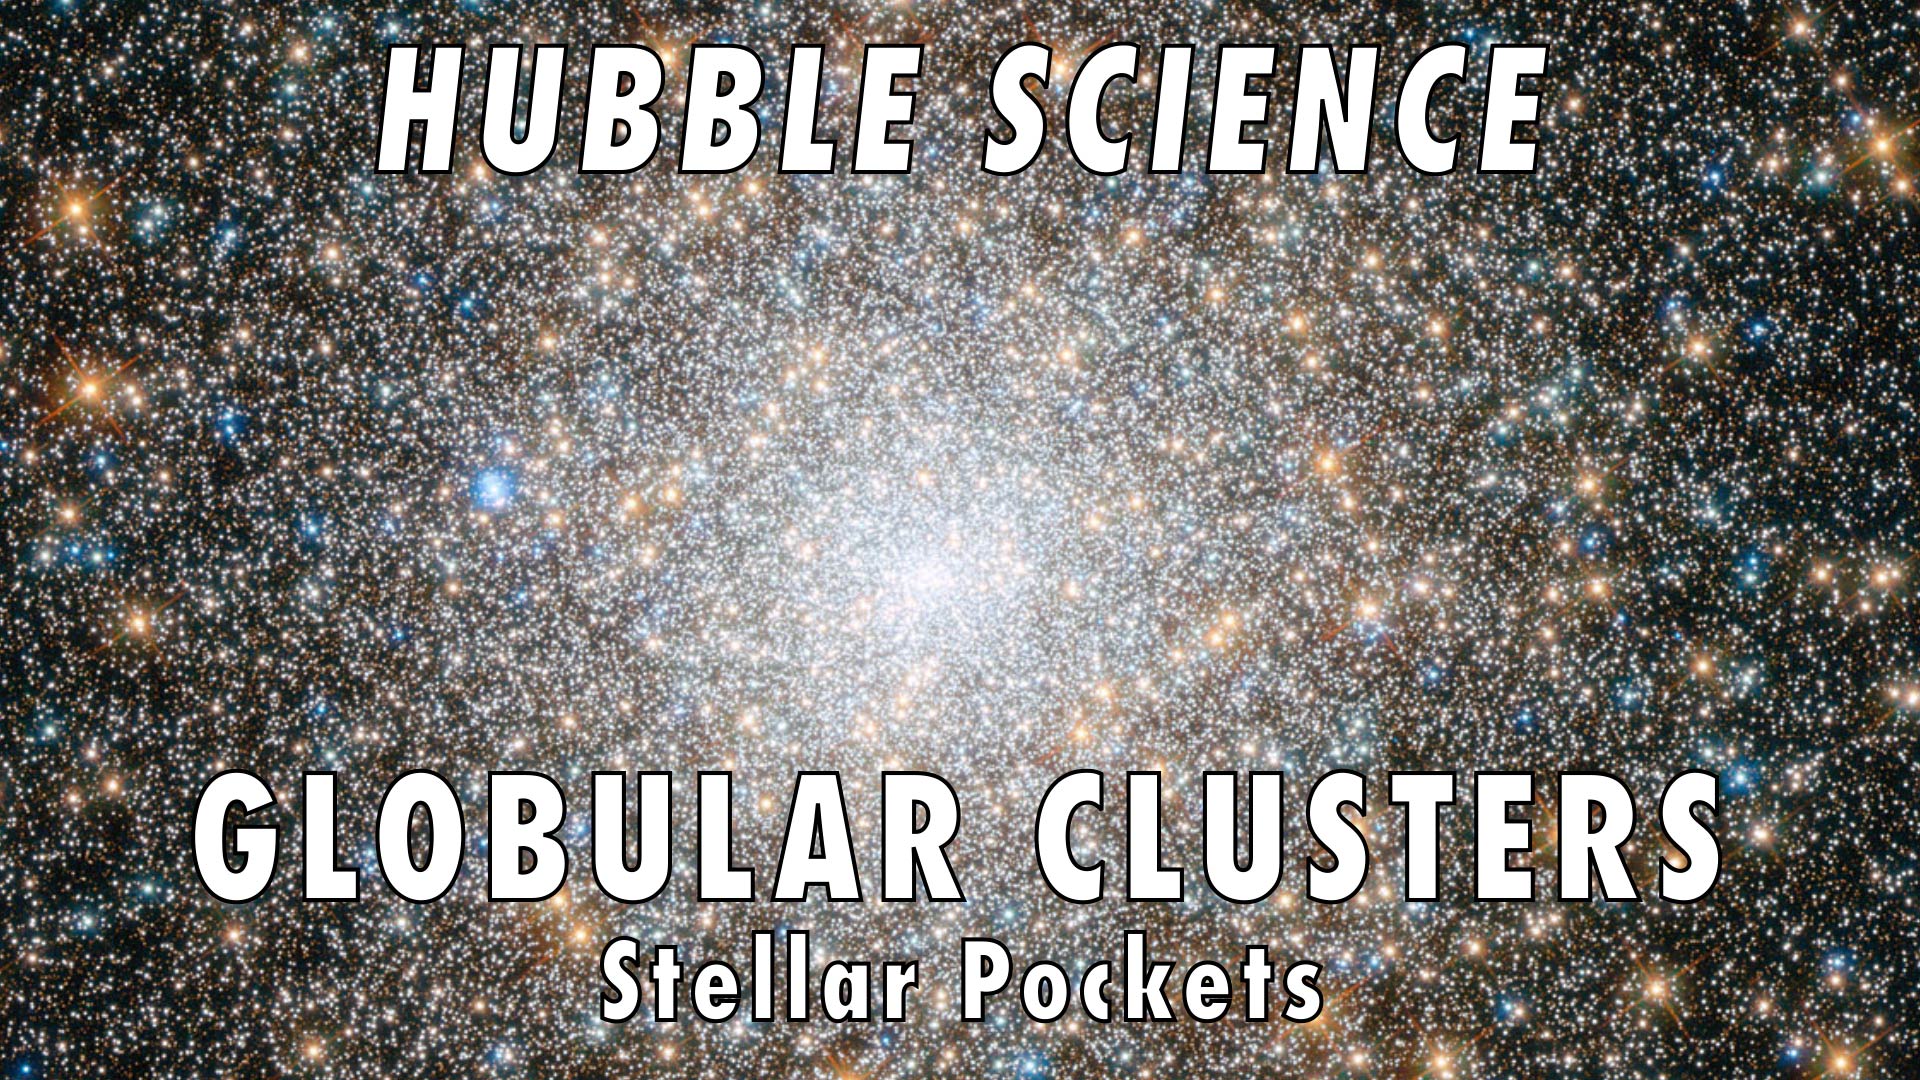 Preview Image for Hubble Science: Globular Clusters, Stellar Pockets